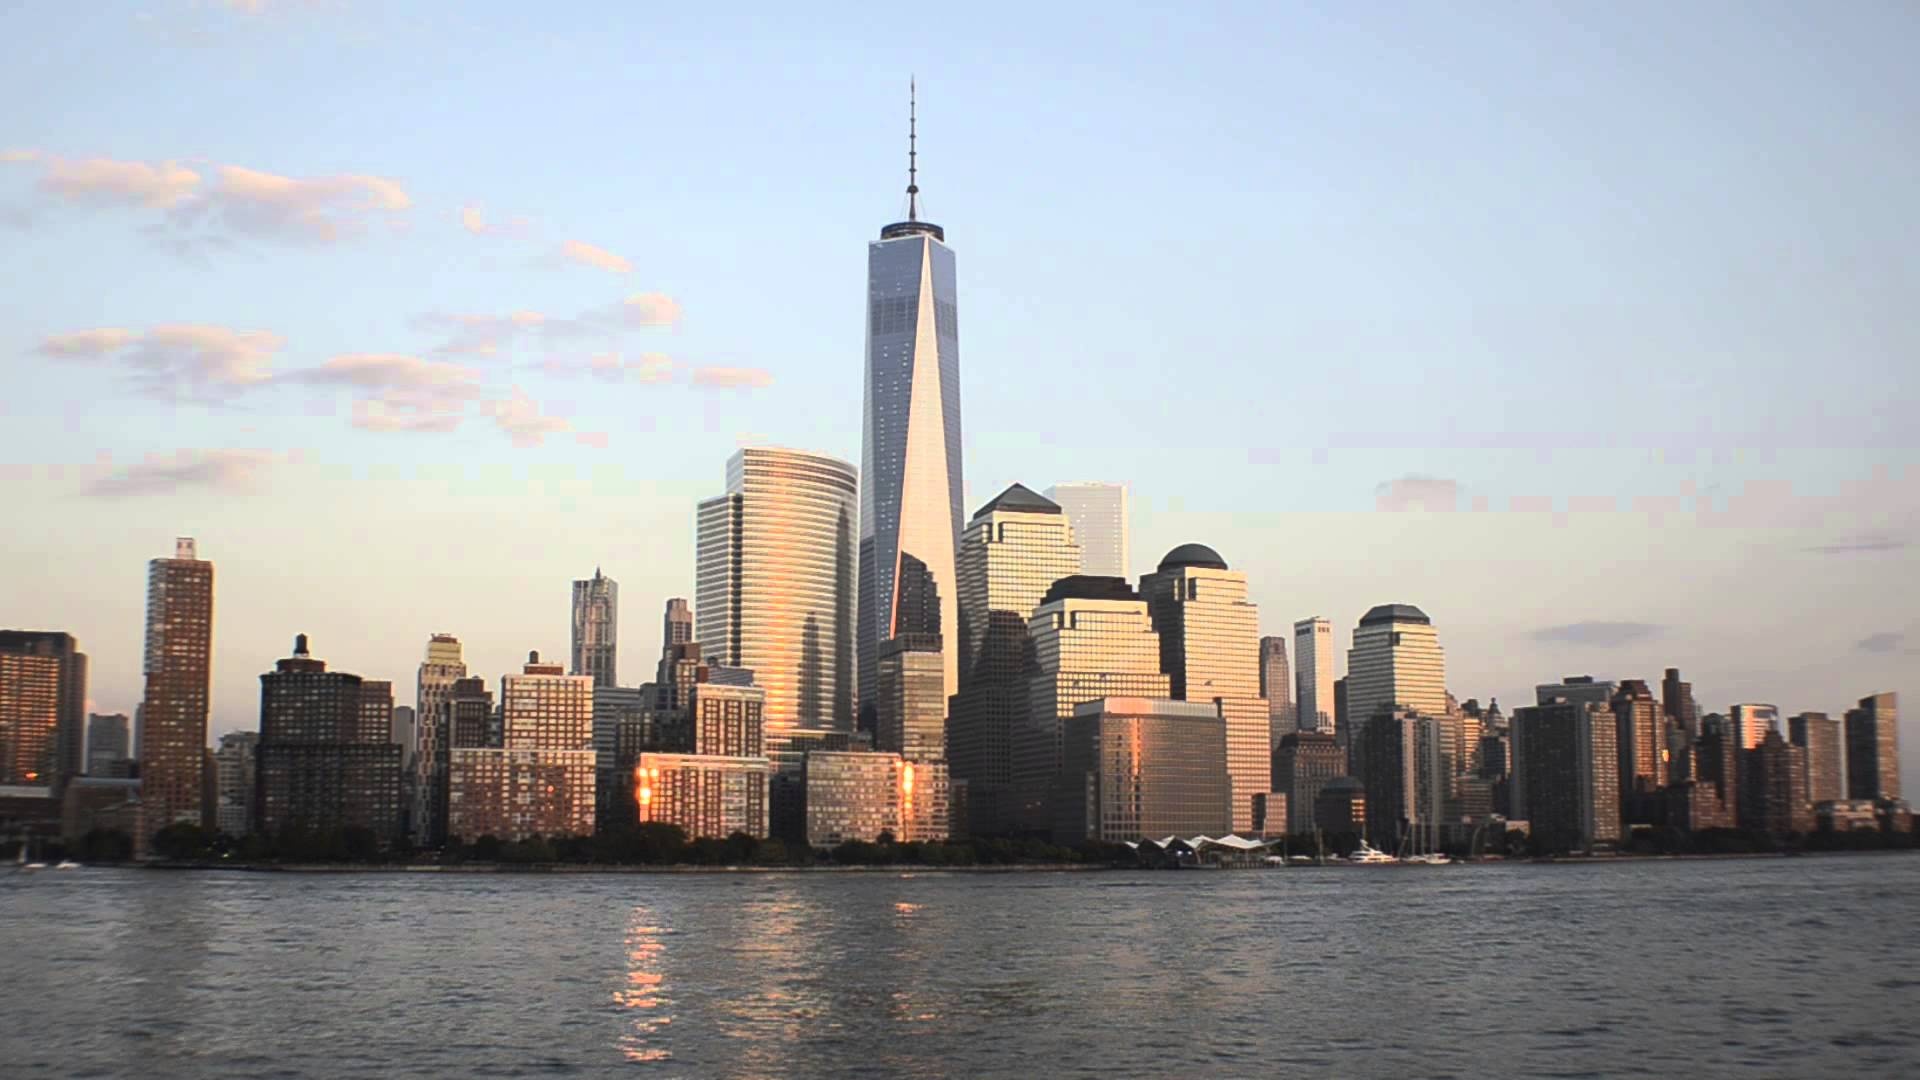 Freedom Tower wallpapers, Top free backgrounds, 1920x1080 Full HD Desktop